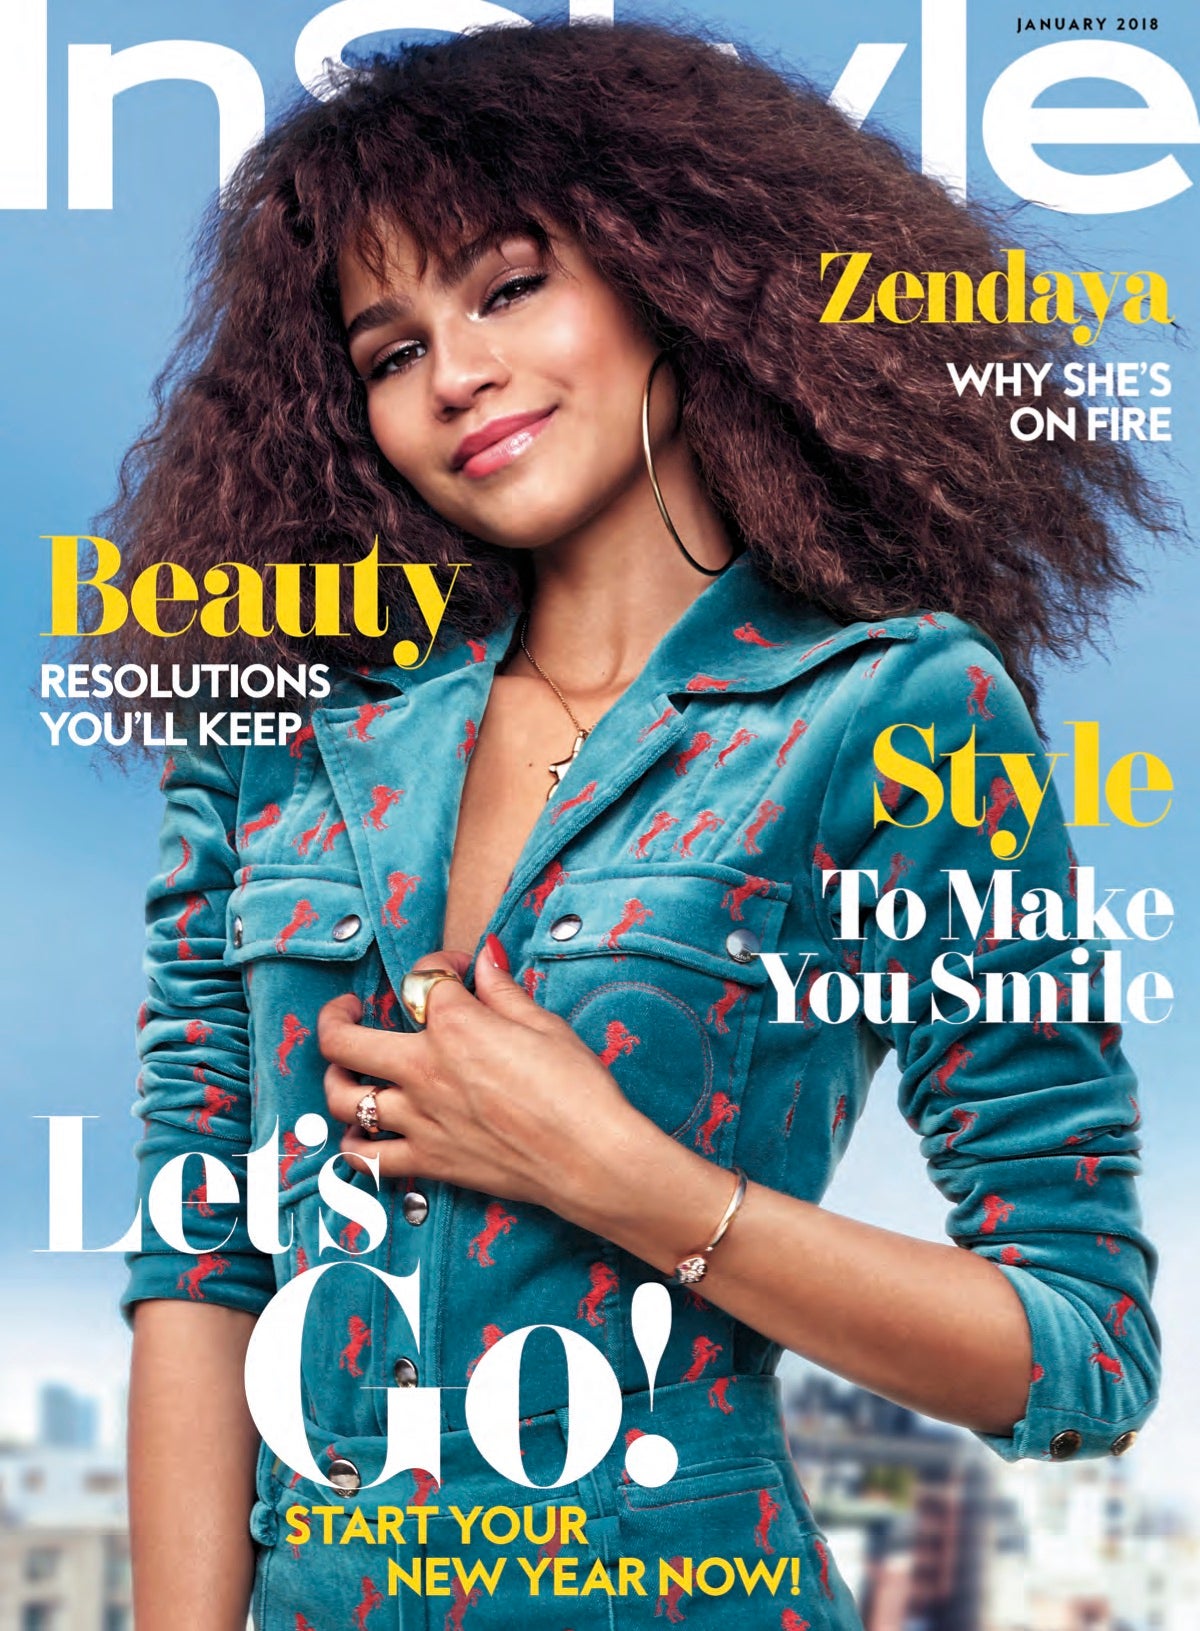 Zendaya Had The Best Response For The Wave Of Sexual Harassment Incidents In Hollywood
